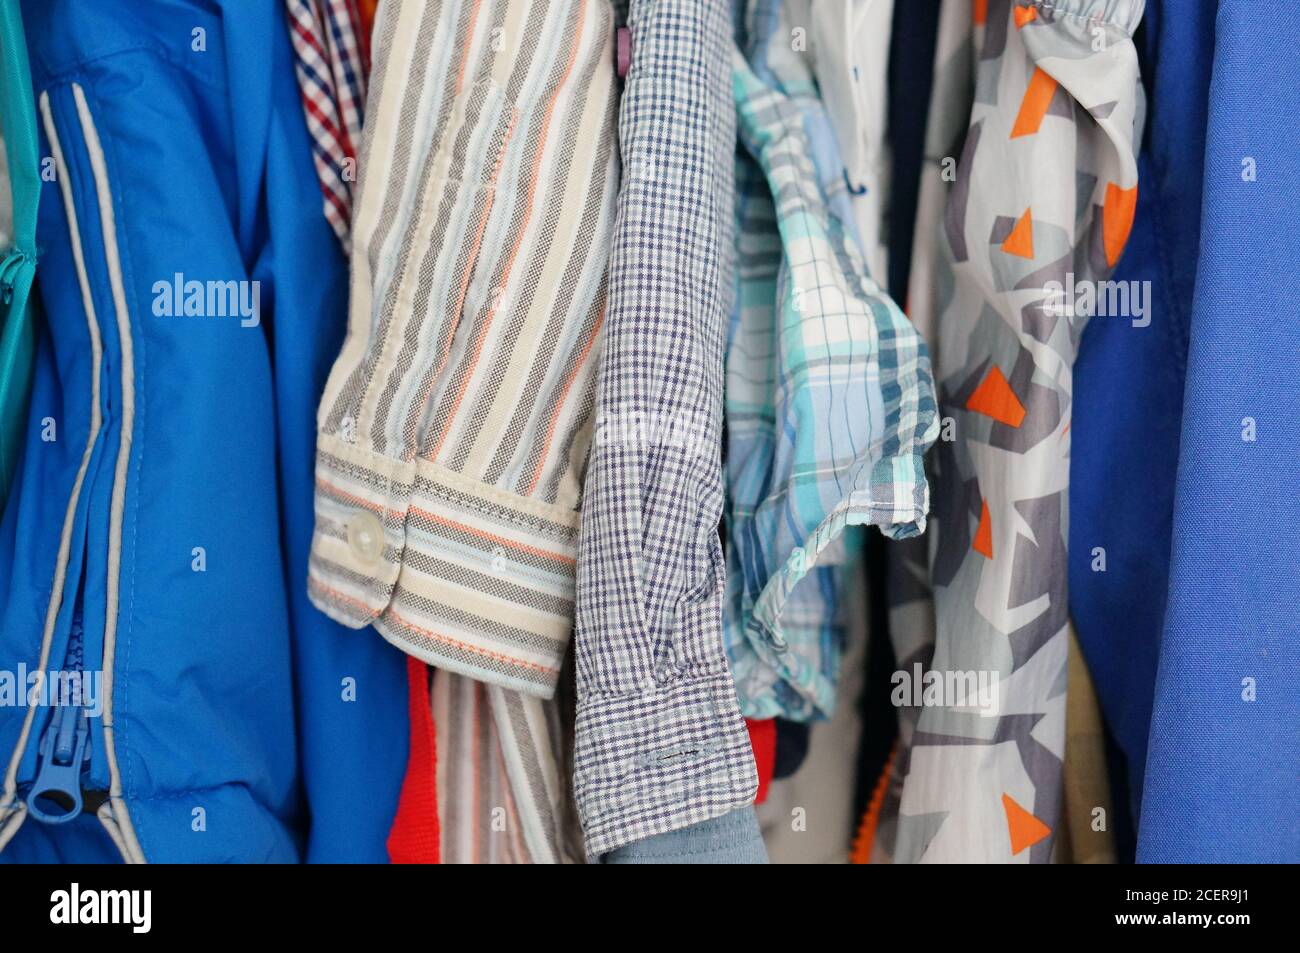 Coat Hangar High Resolution Stock Photography and Images - Alamy